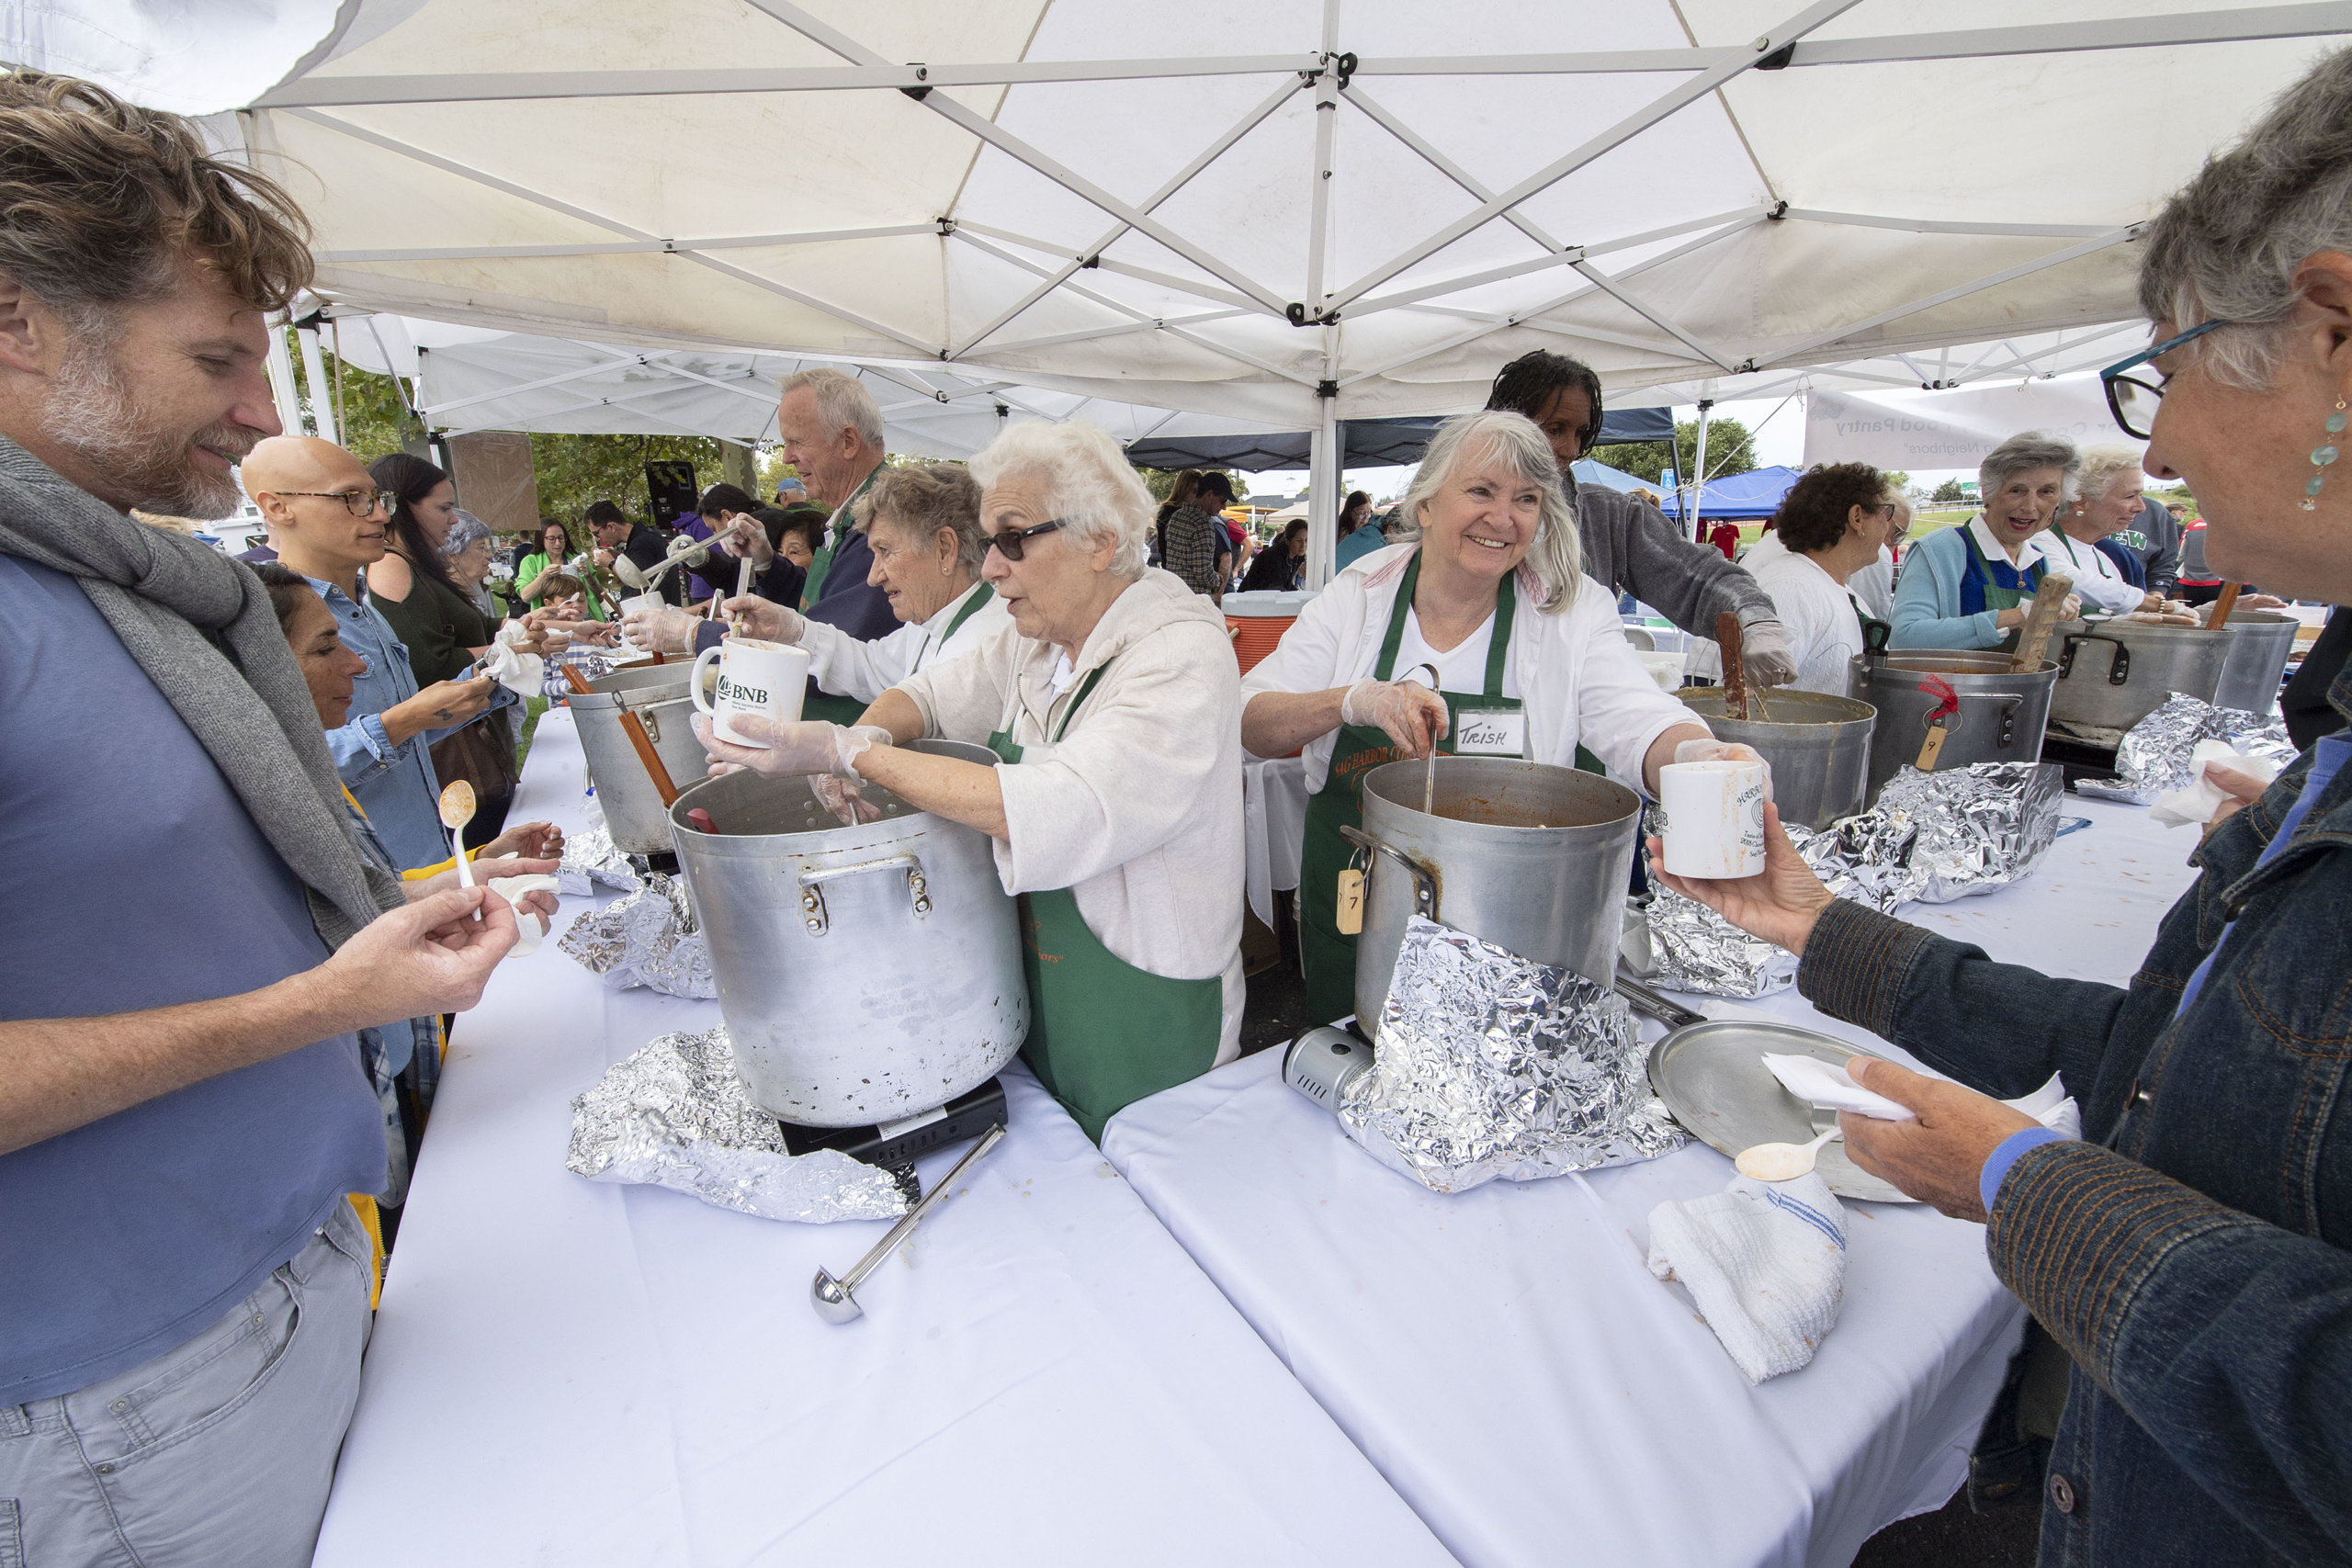 The famous HarborFest Clam Chowder Contest will return to Long Wharf on Sunday, September 12, starting at noon. Michael Heller